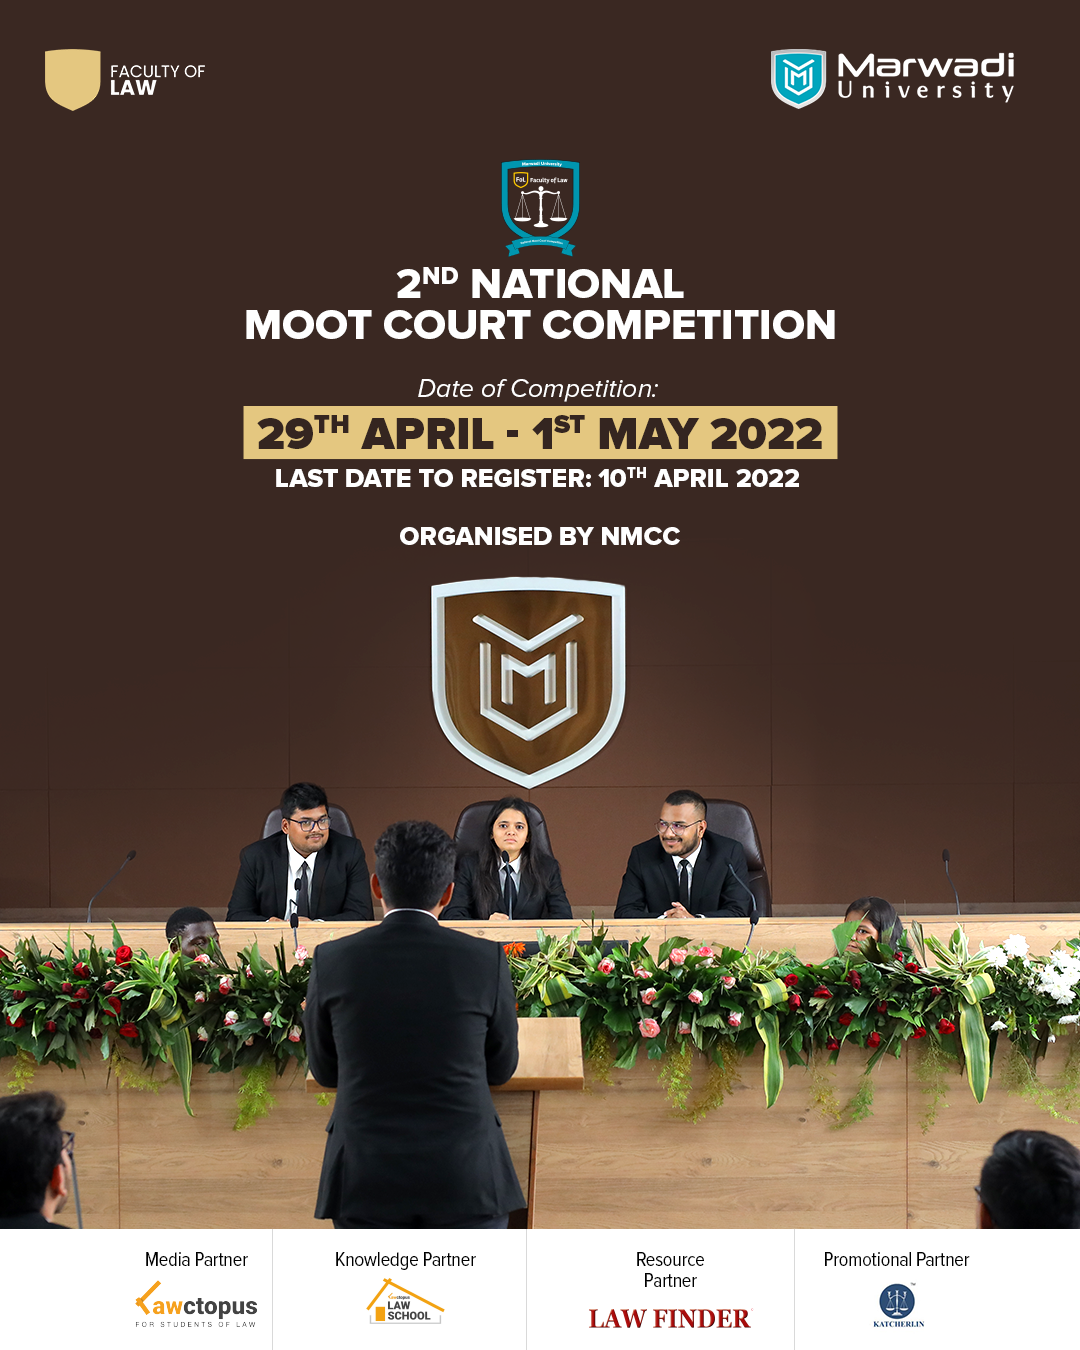 2nd National Moot Court Competition for law students by FoL, Marwadi